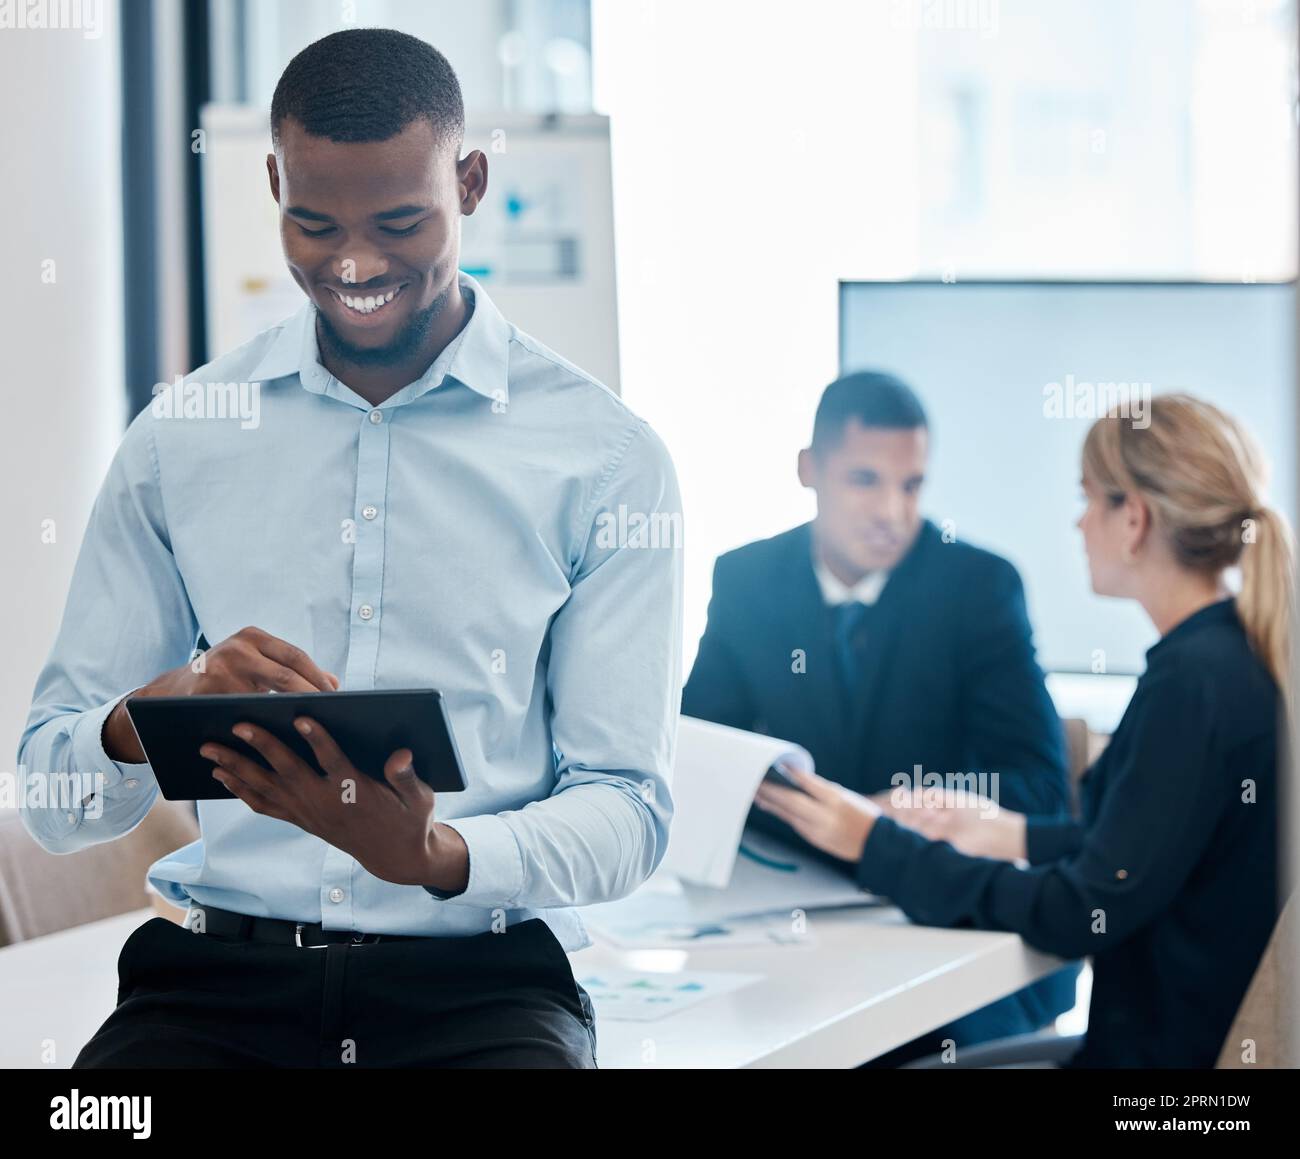 Business man, tablet and marketing research for crm while in team meeting with a smile for good feedback. Diversity, corporate and professional group of people doing planning and working in a office Stock Photo